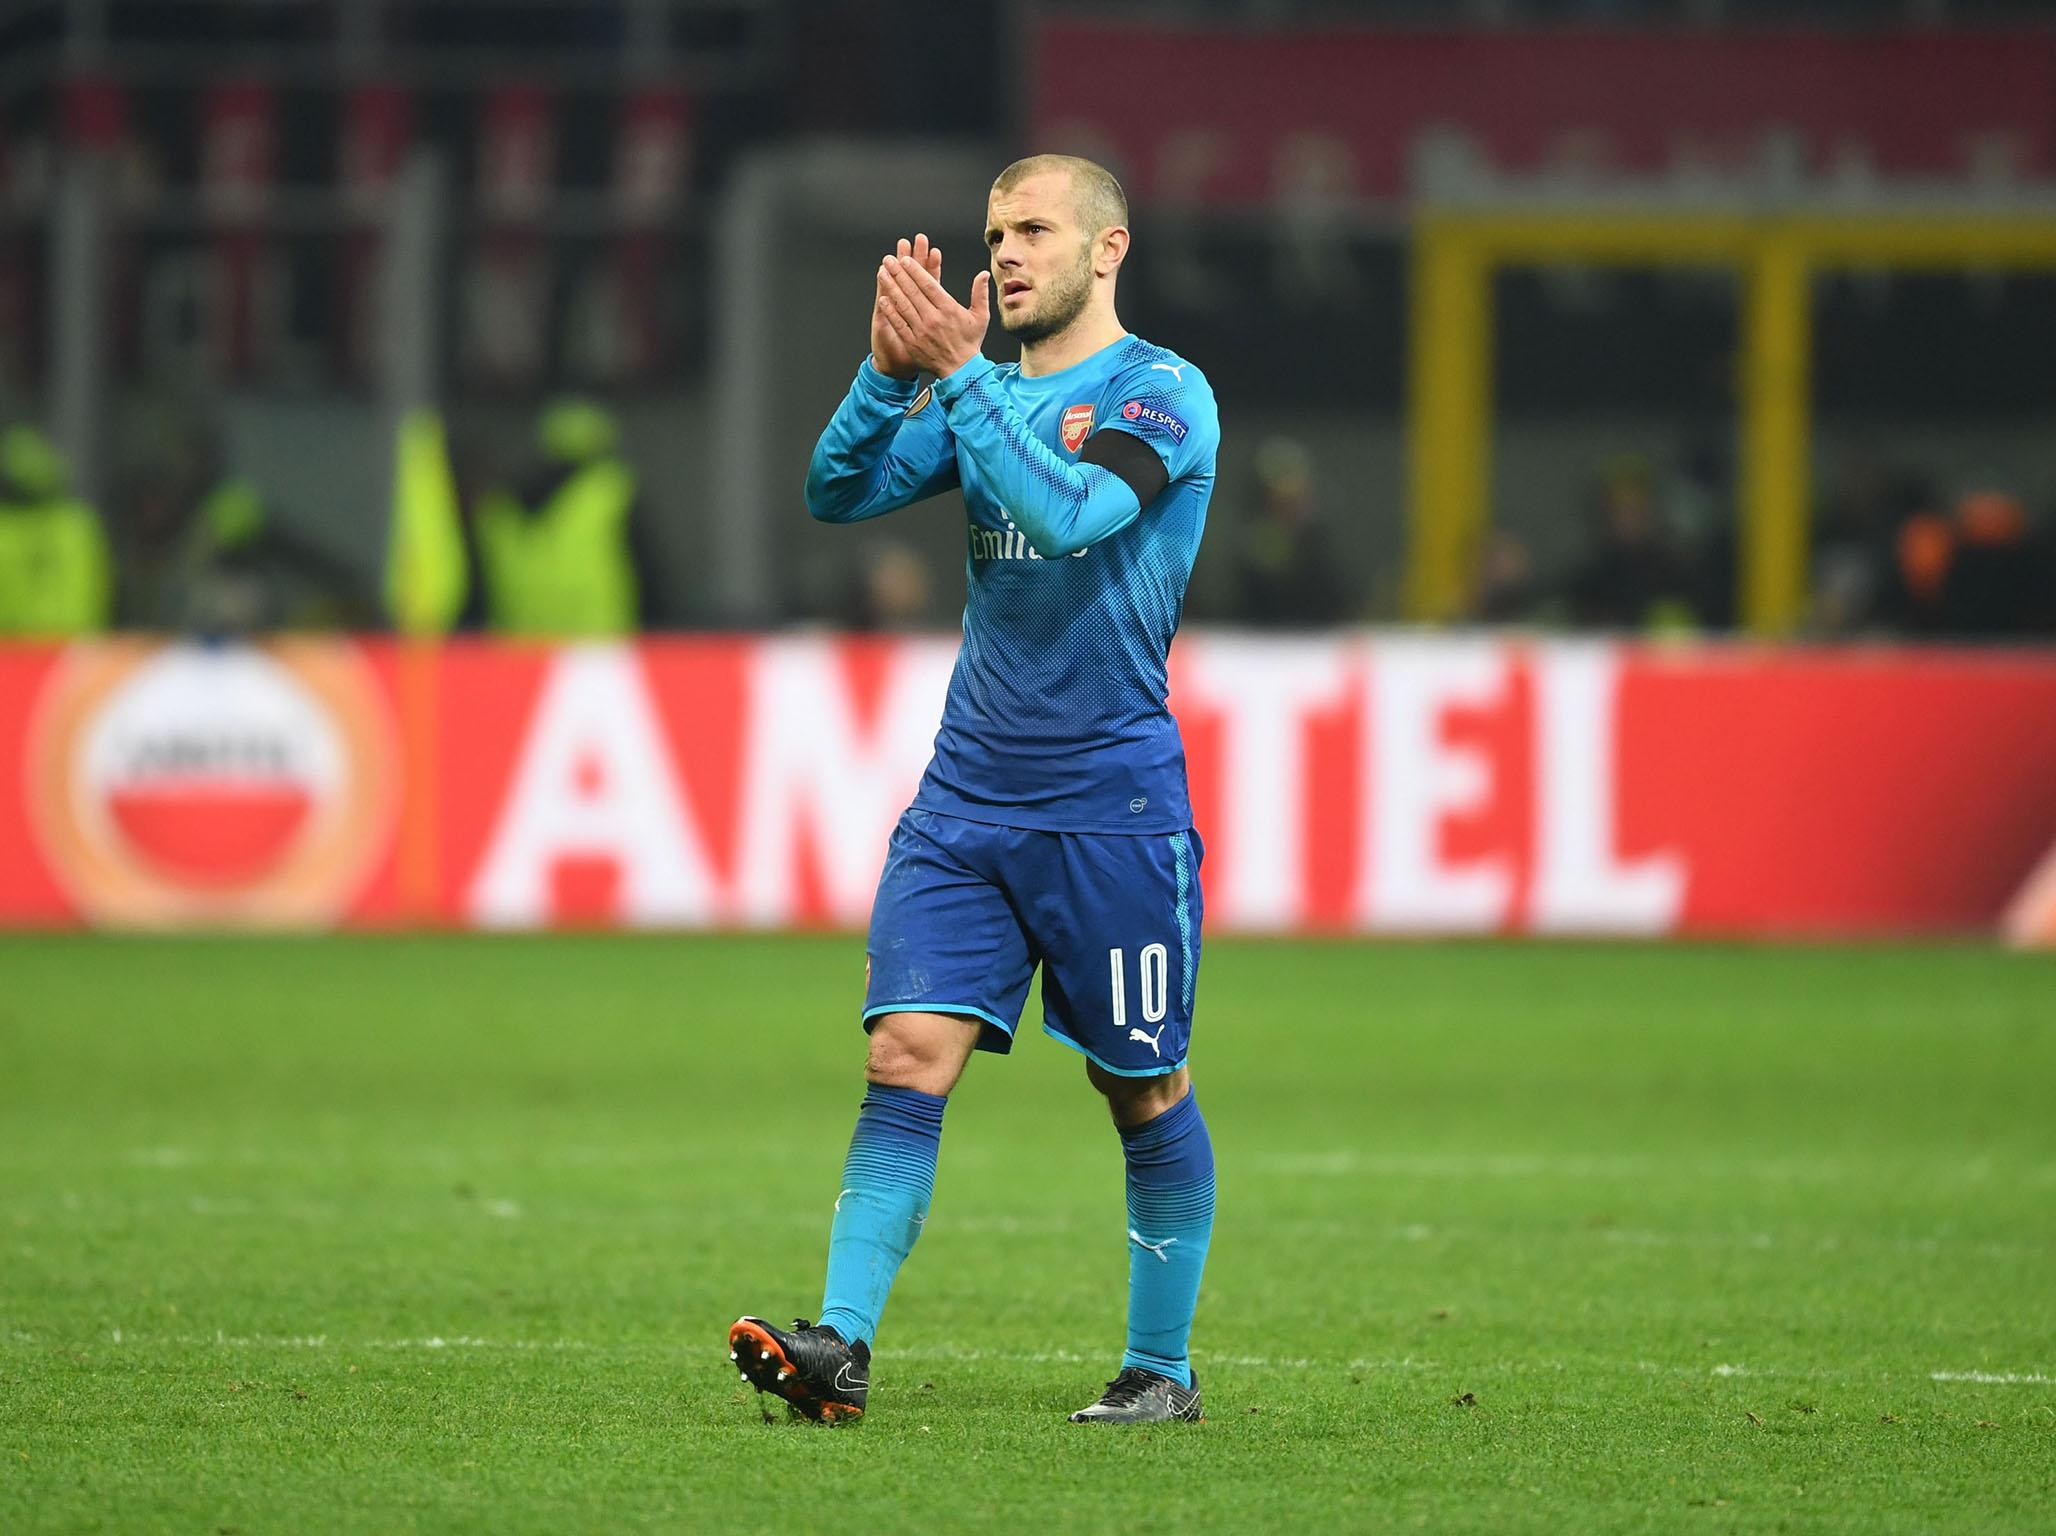 Jack Wilshere pours doubt on Arsenal future with revelation he is 'no closer' to agreeing new contract